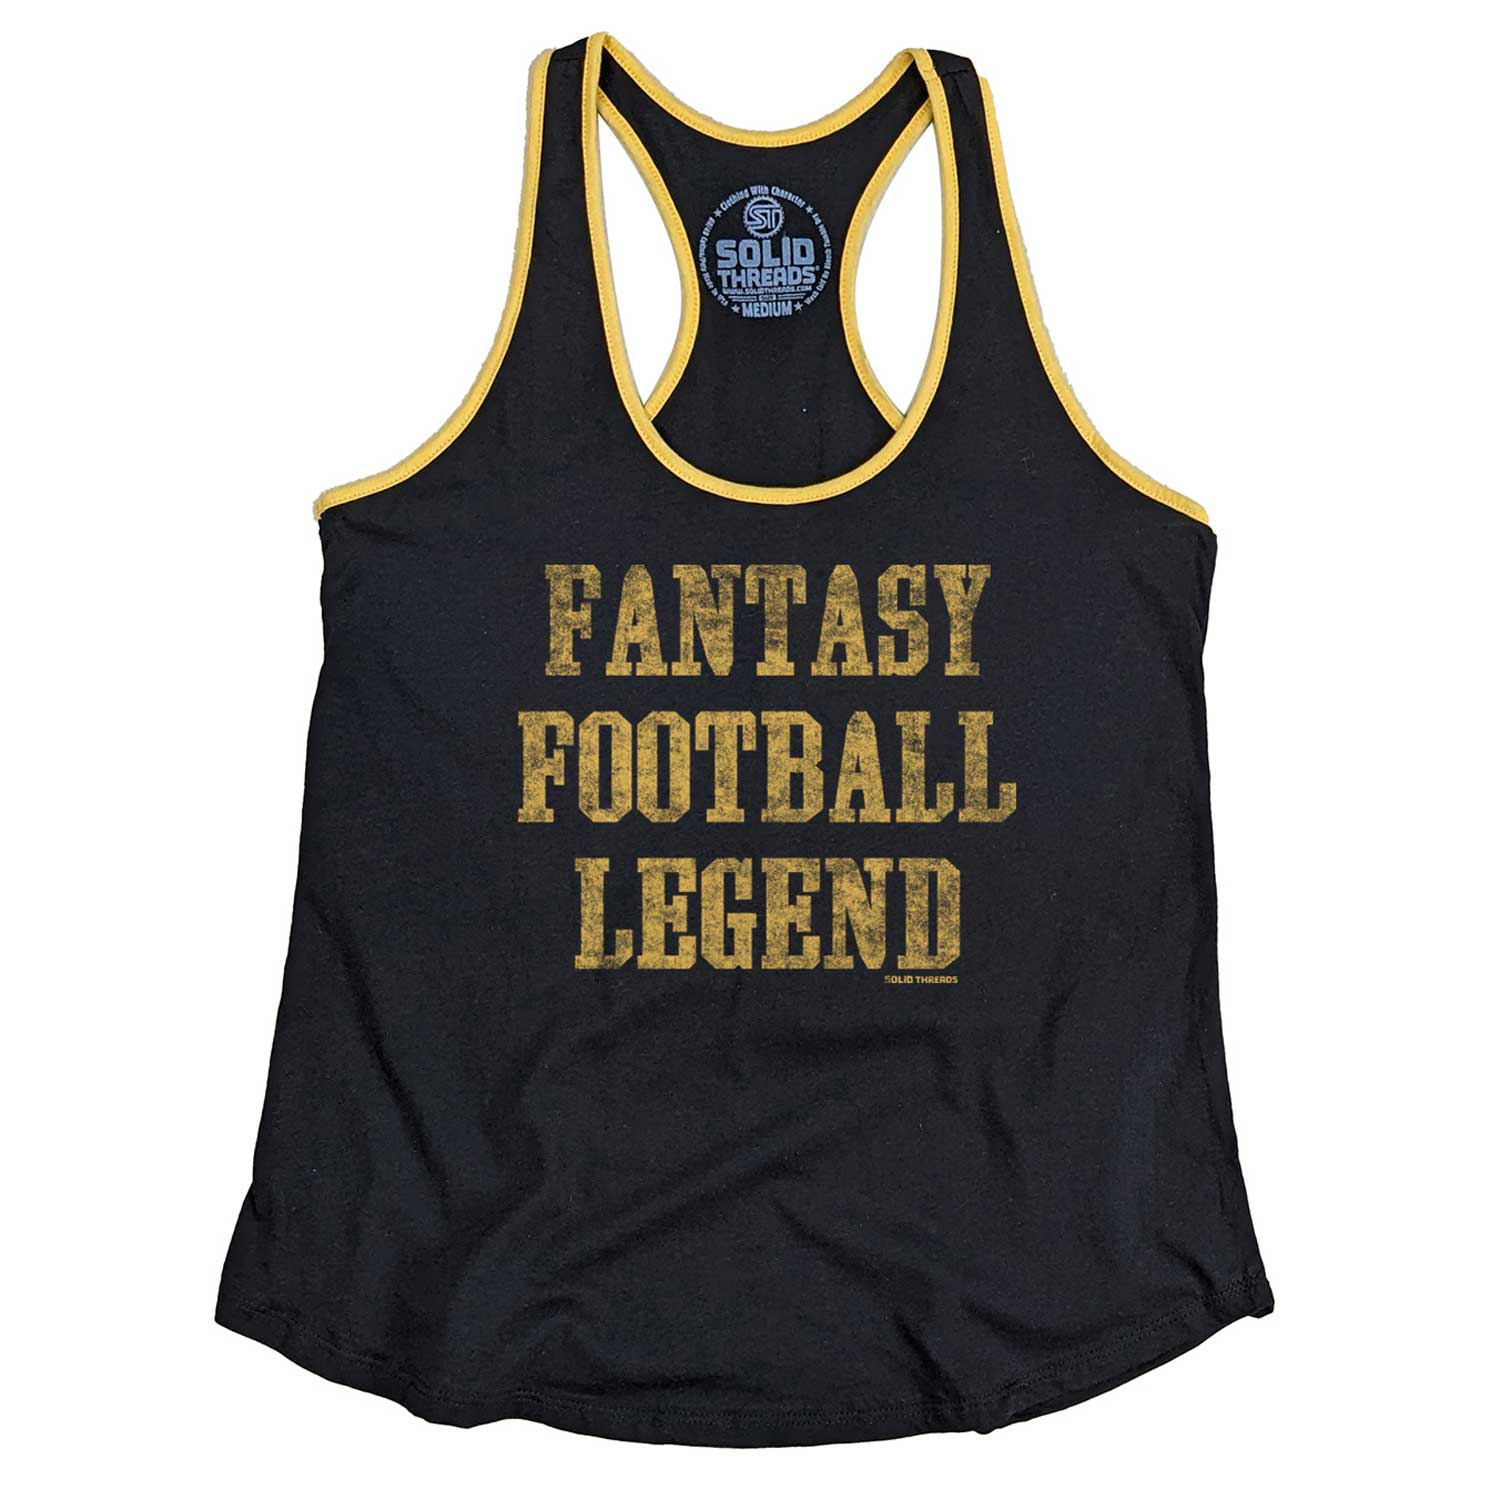 Women's Fantasy Football Legend Vintage Graphic Tank Top | Funny Sports T-shirt | Solid Threads